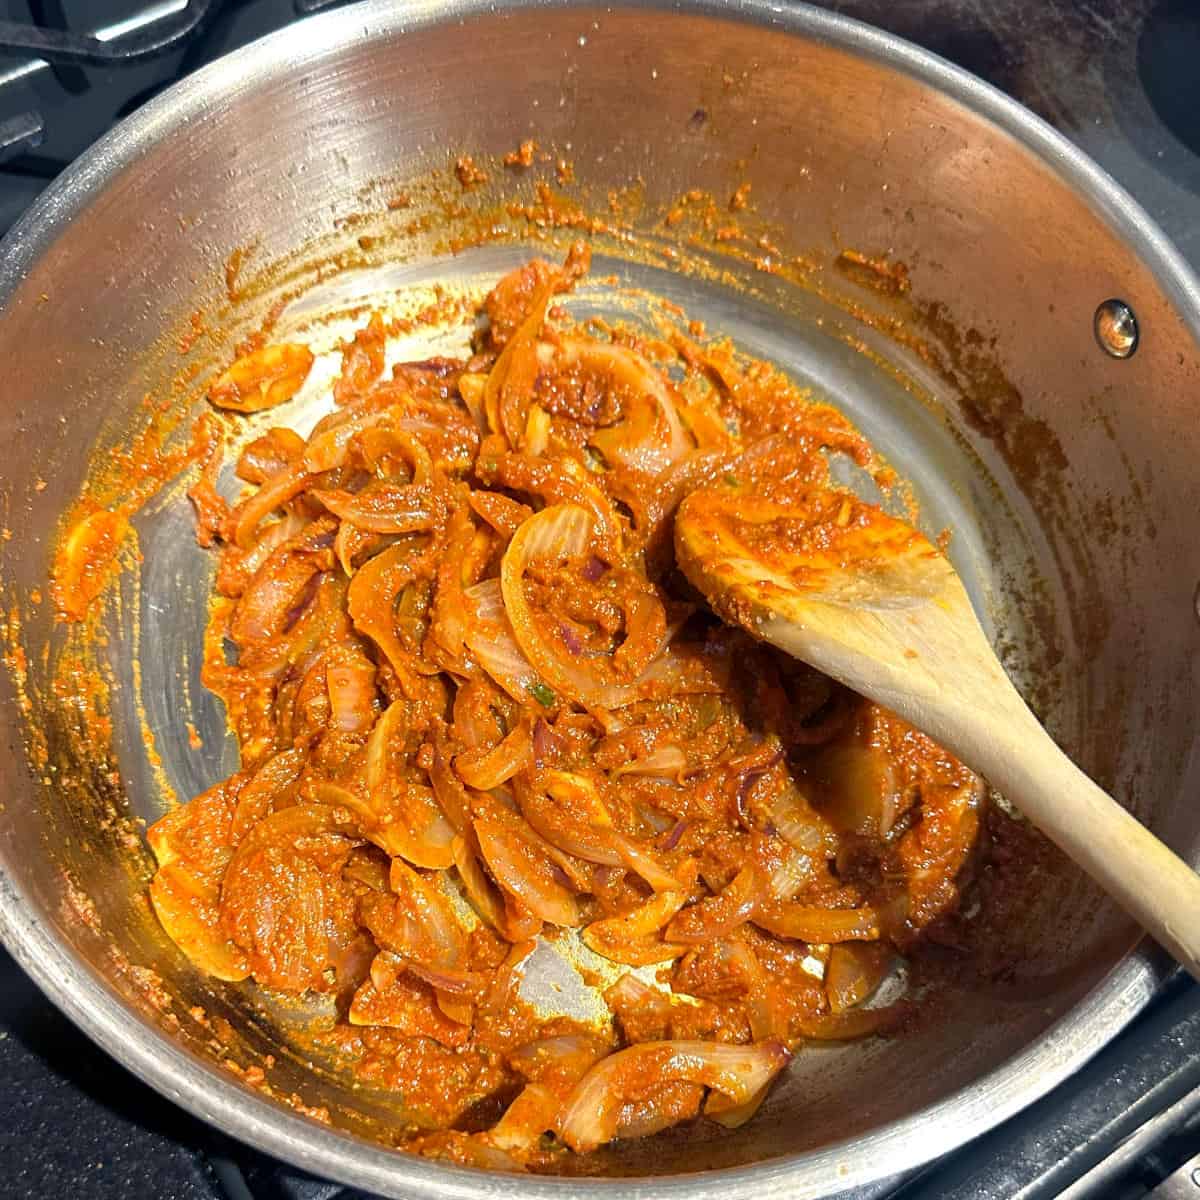 Spices and onions and tomatoes mixed in pan, cooking.